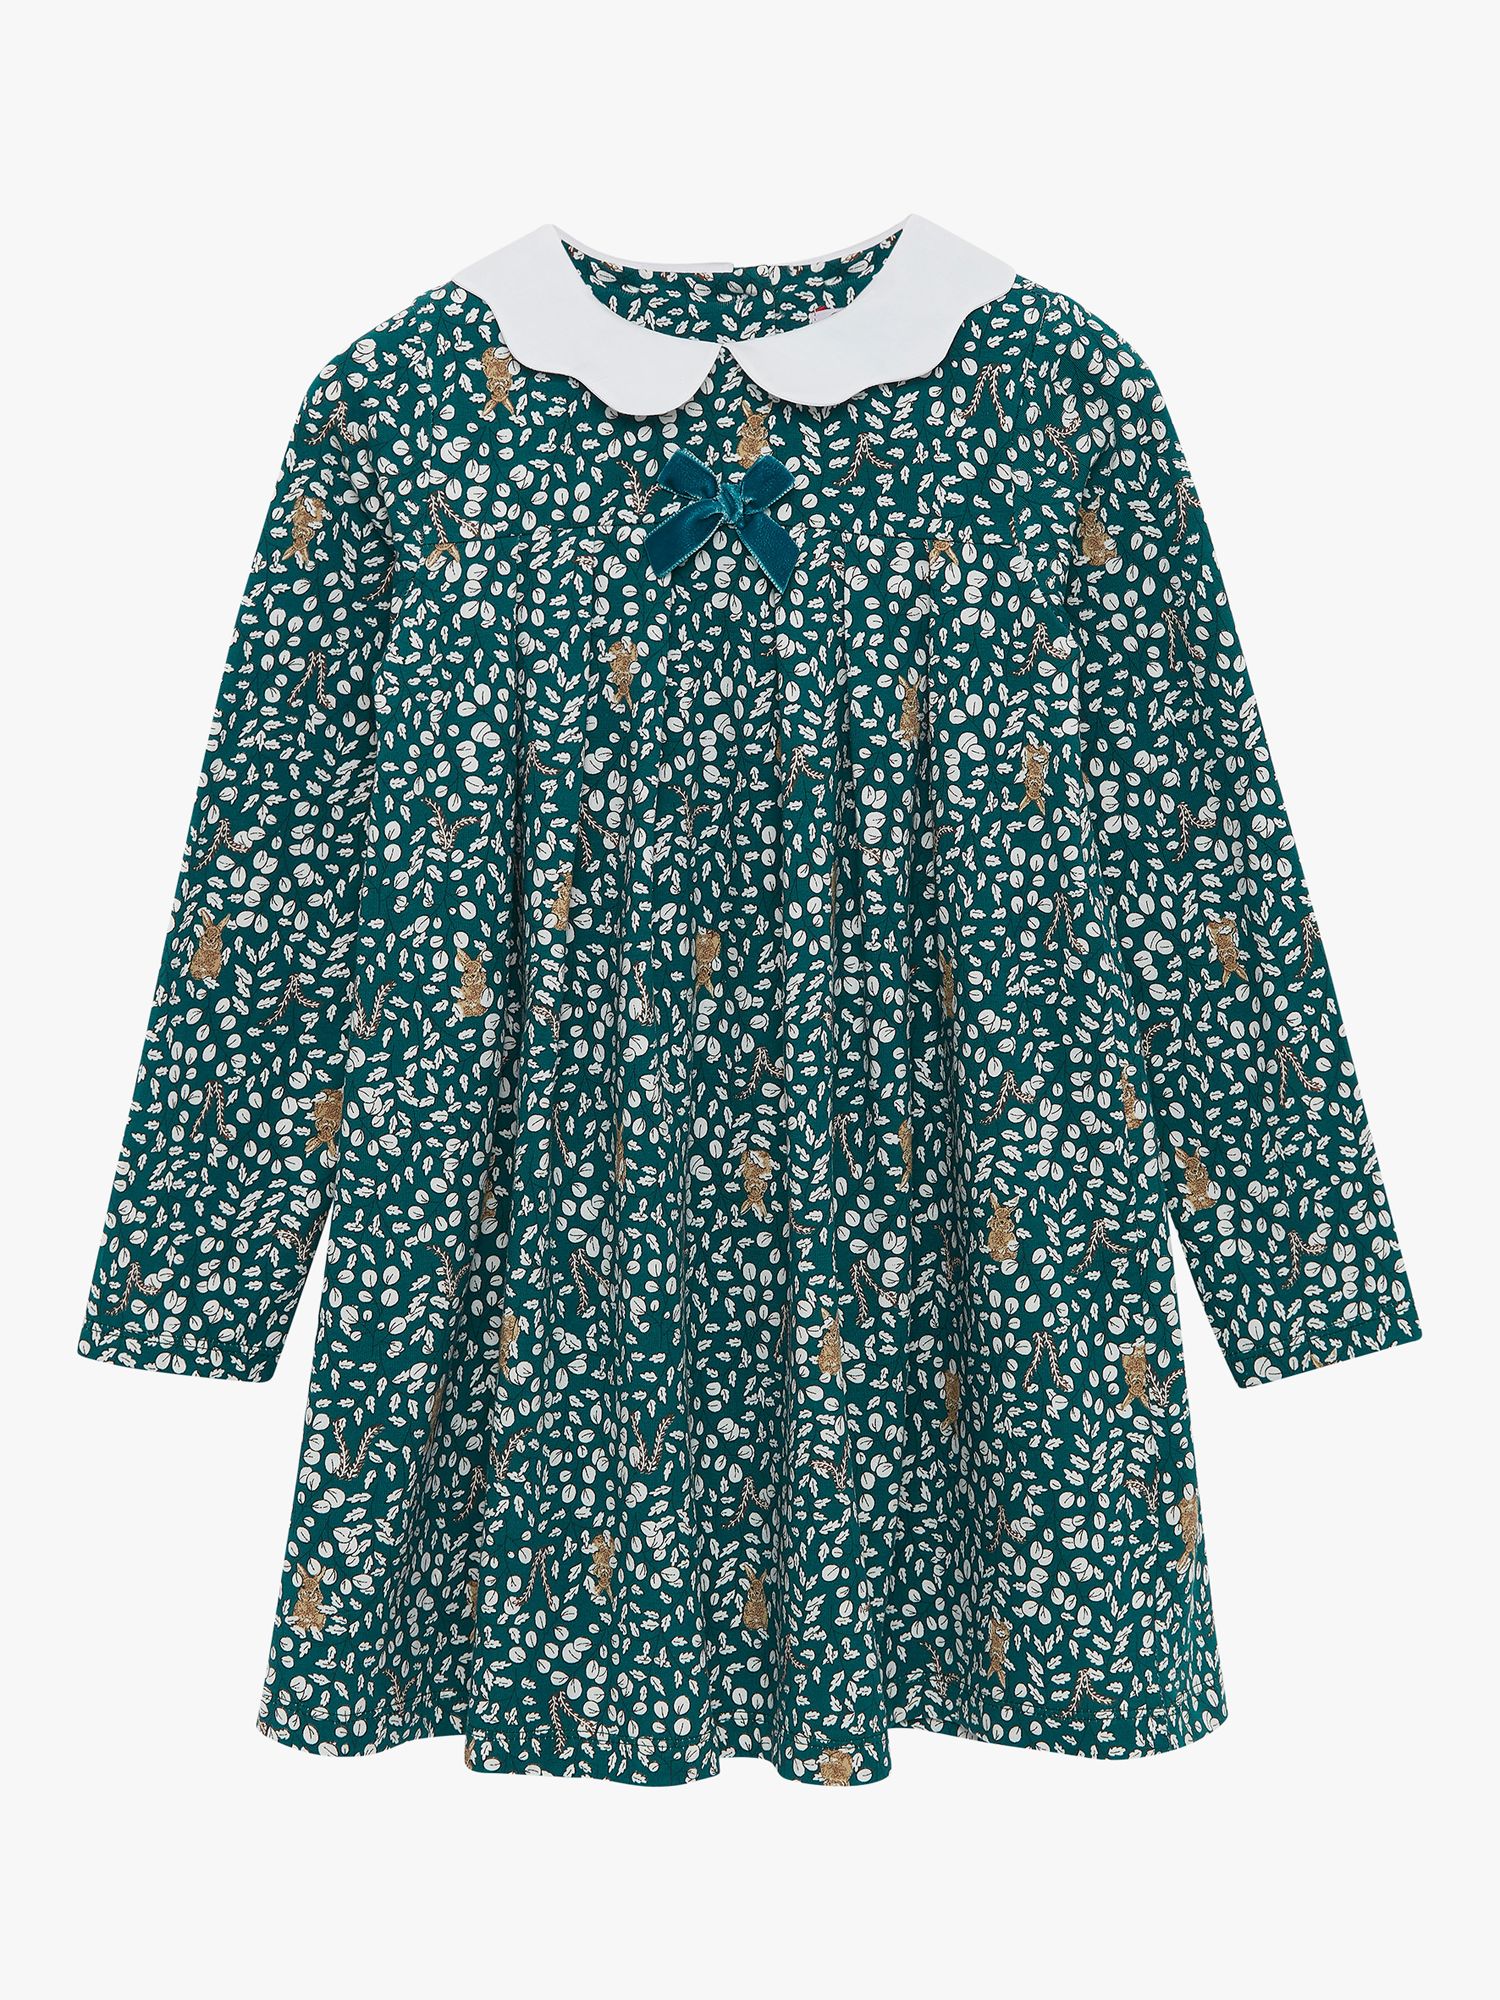 Trotters Kids' Woodland Bunny Print Dress, Forest Green at John Lewis ...